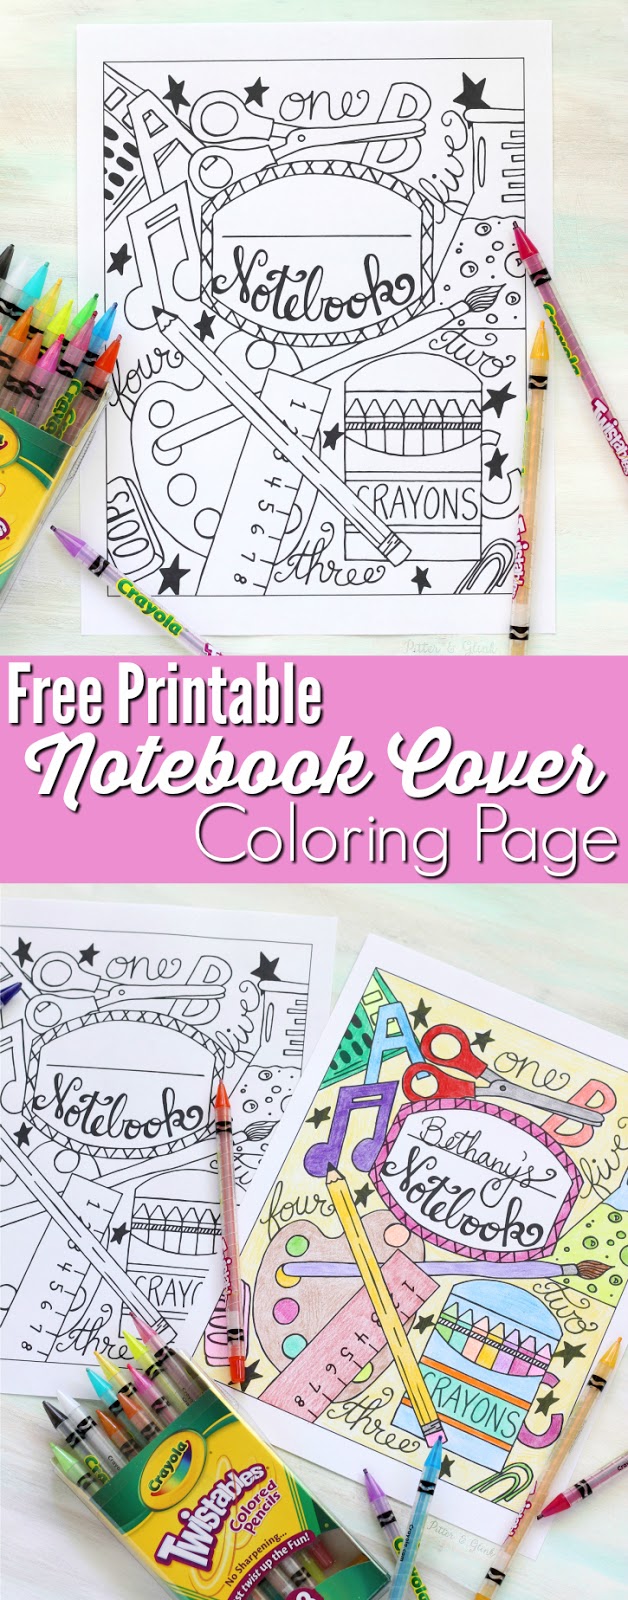 Organize for School with Printable Notebook Covers - Sweet Anne Designs